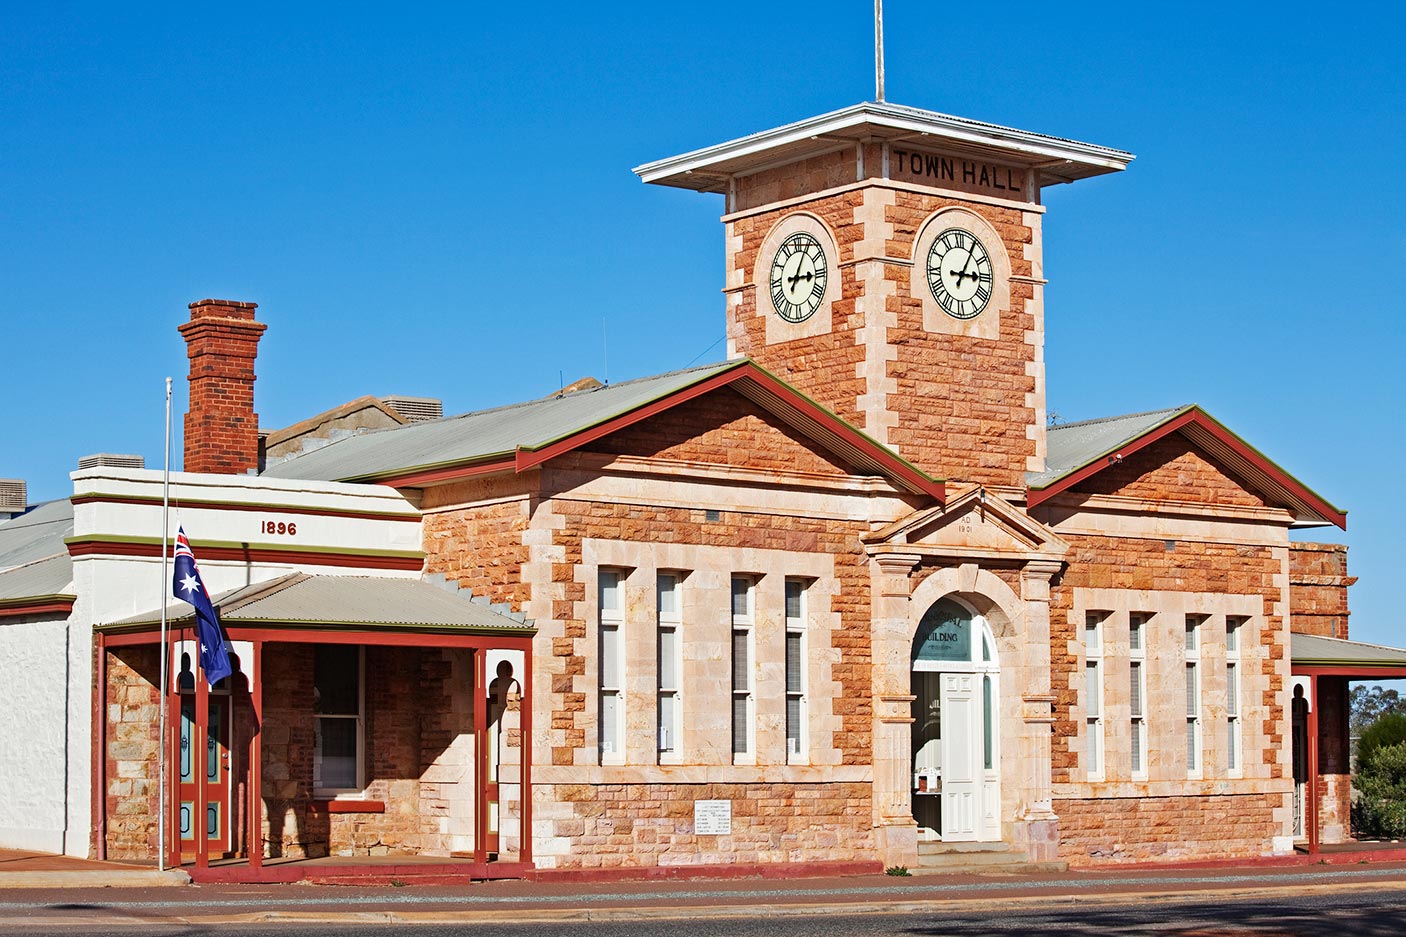 An external image of a historic town hall